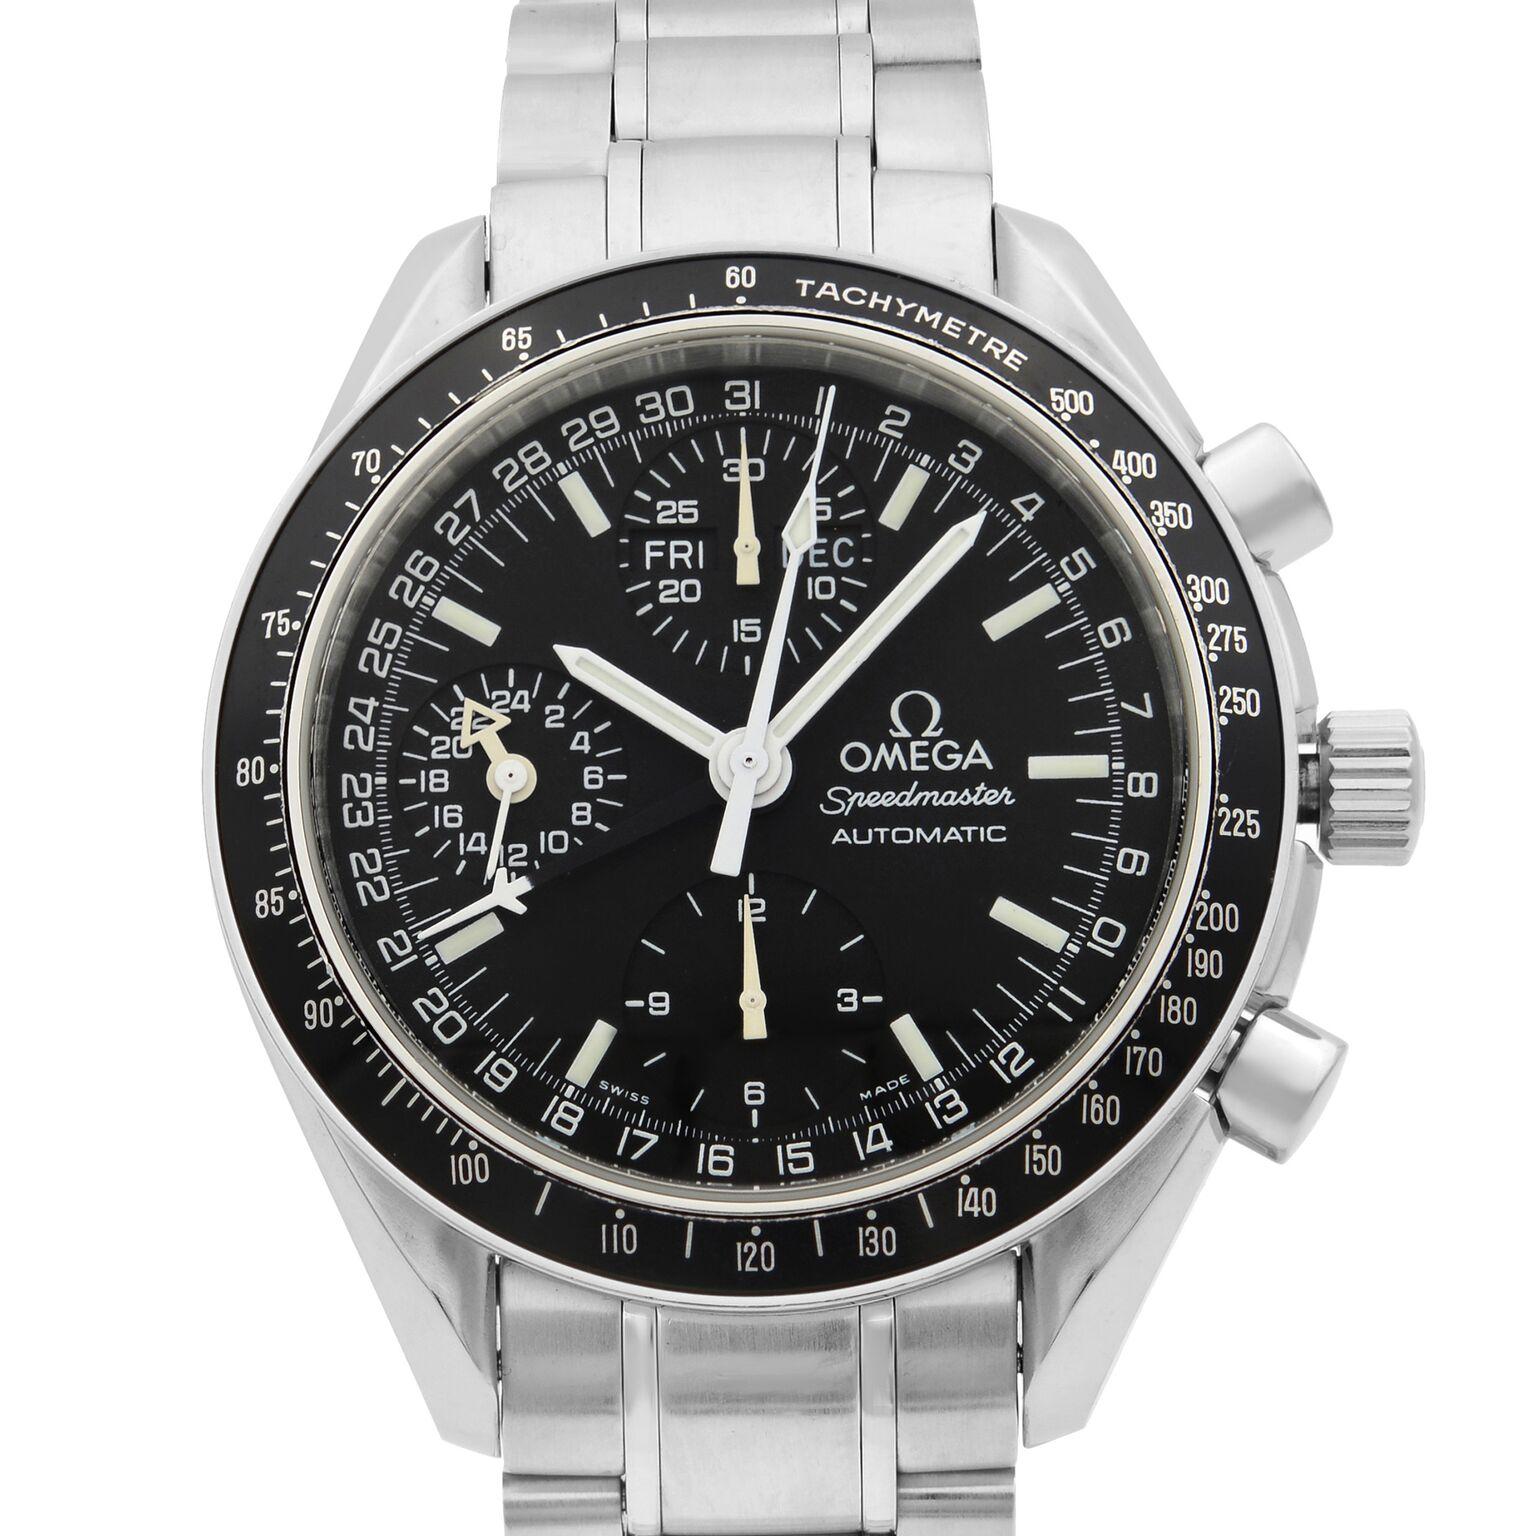 This pre-owned Omega Speedmaster  3220.50.00 is a beautiful men's timepiece that is powered by mechanical (automatic) movement which is cased in a stainless steel case. It has a round shape face, chronograph, date indicator, small seconds subdial